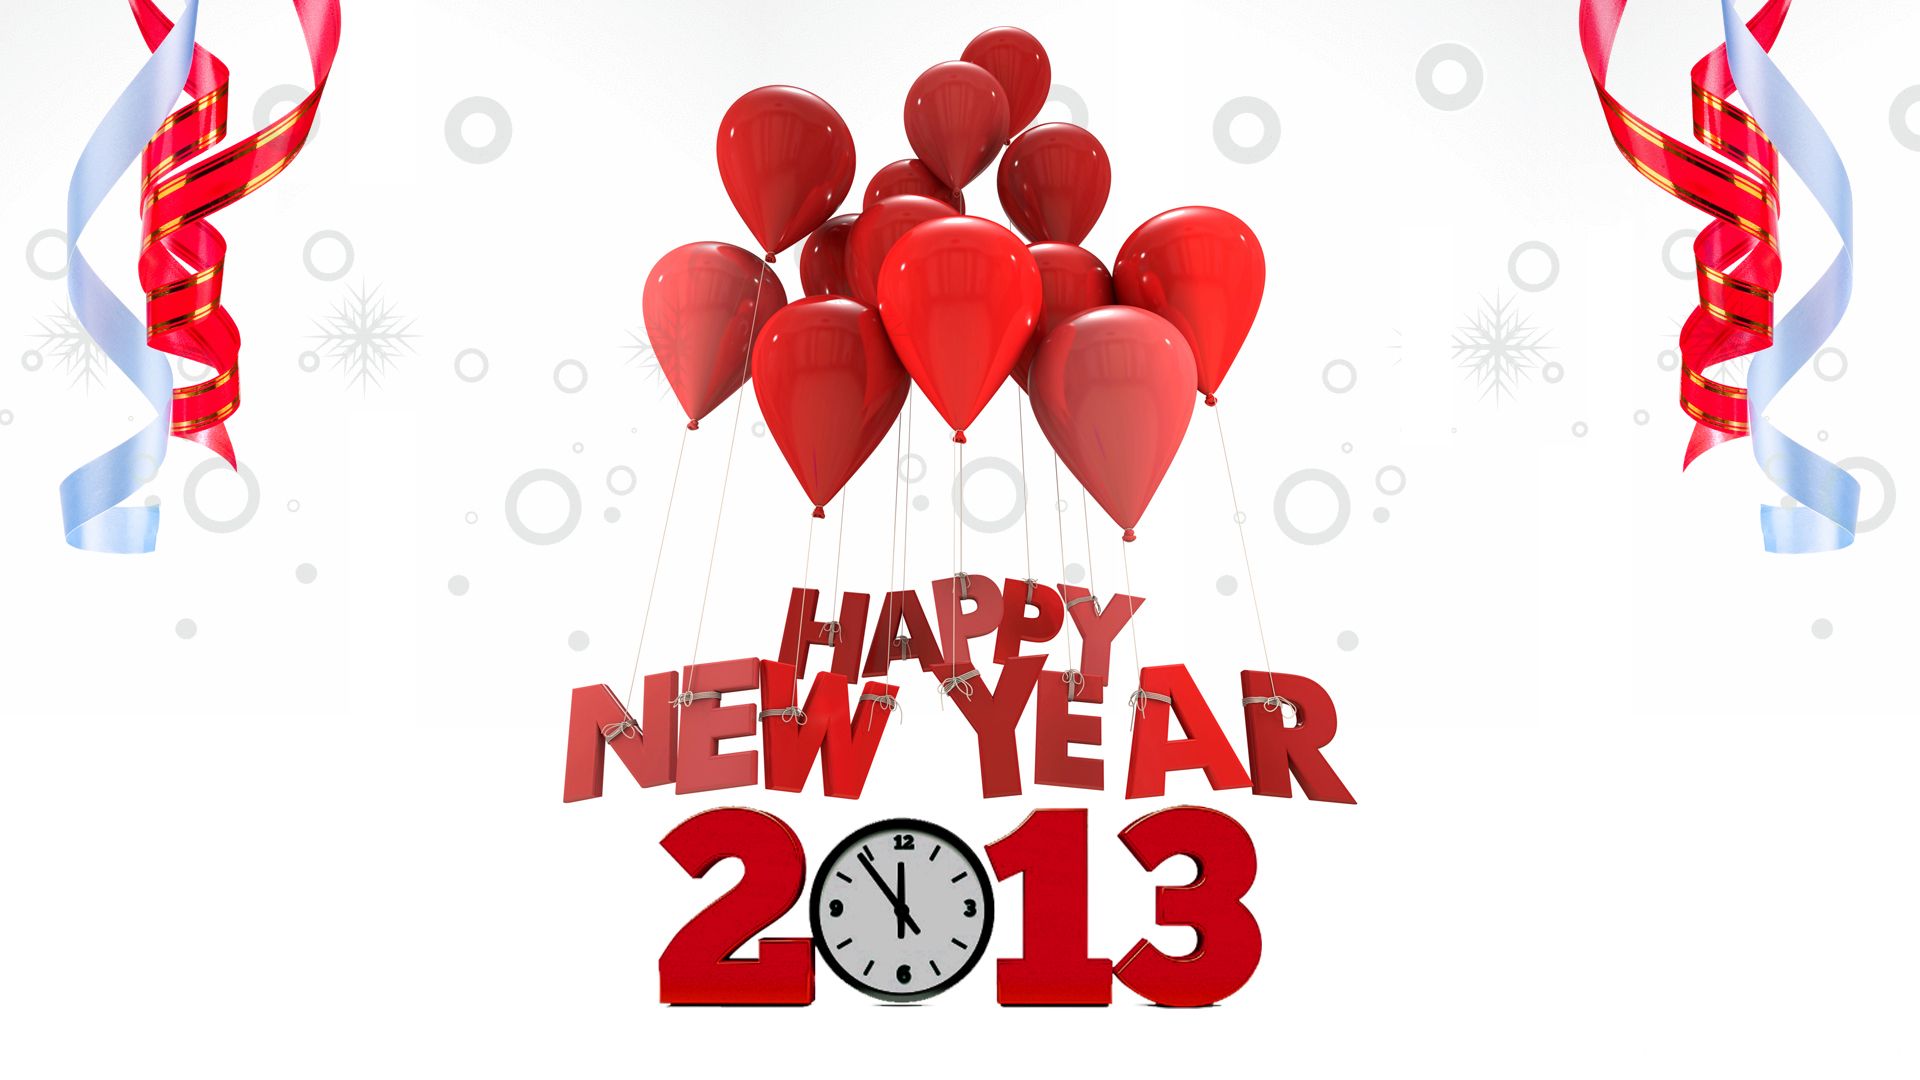 Happy New Year Balloon And Clock Picture Wallpaper Desktop